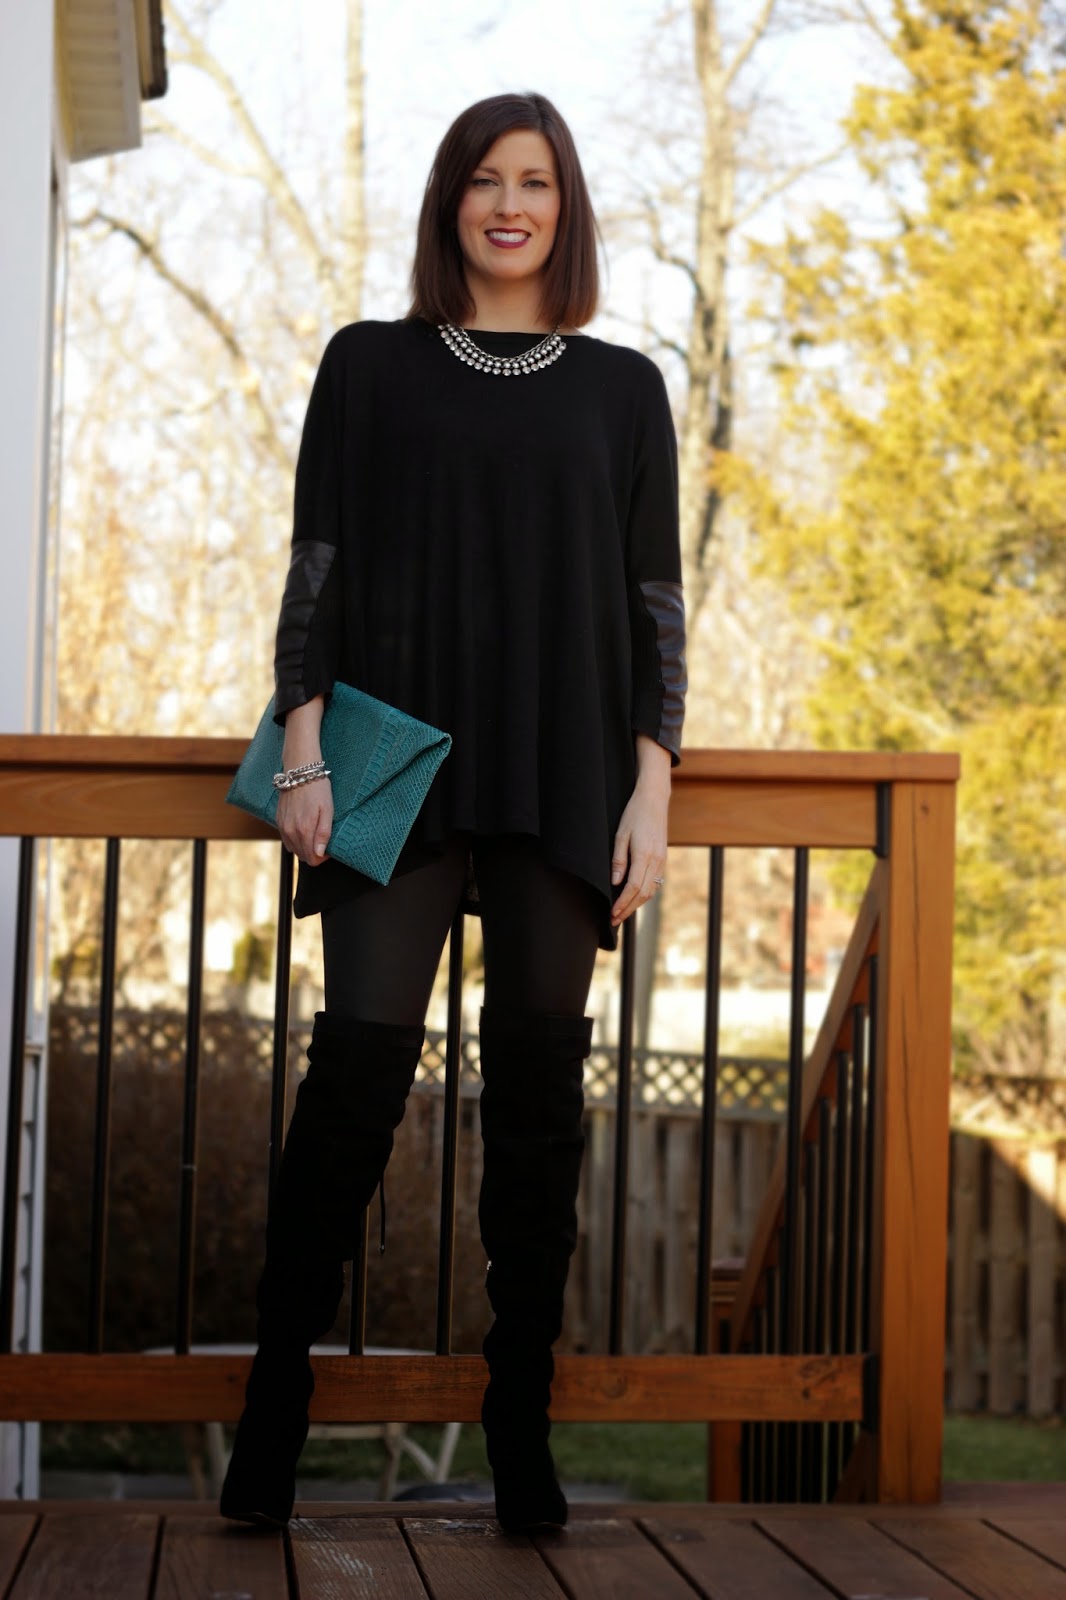 Stylish Saturday: Faux Leather & Thigh Highs